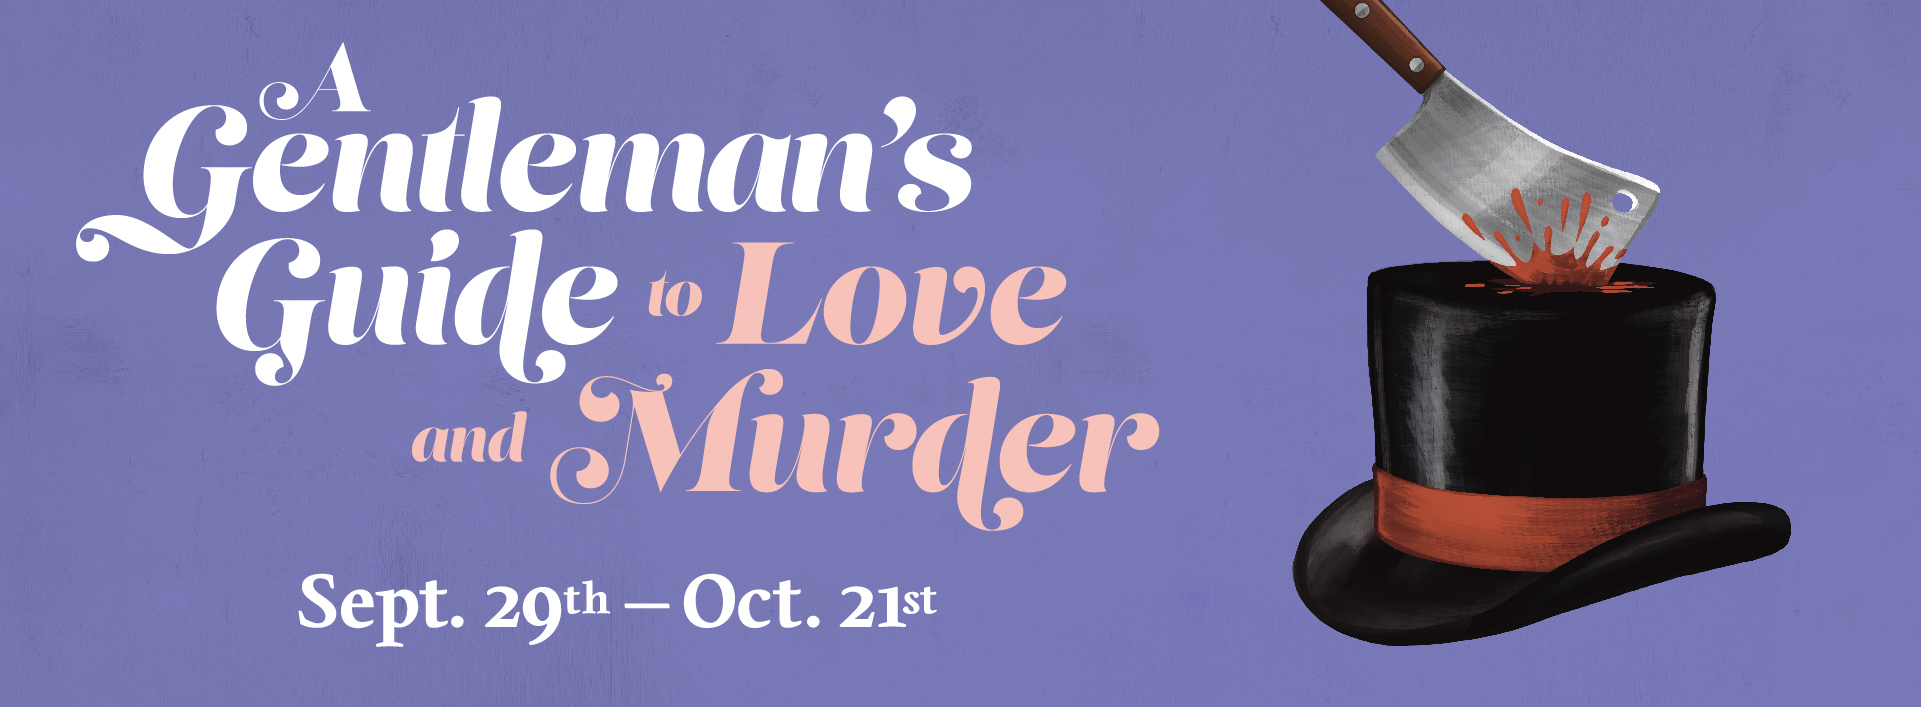 Program for A Gentleman’s Guide to Love and Murder